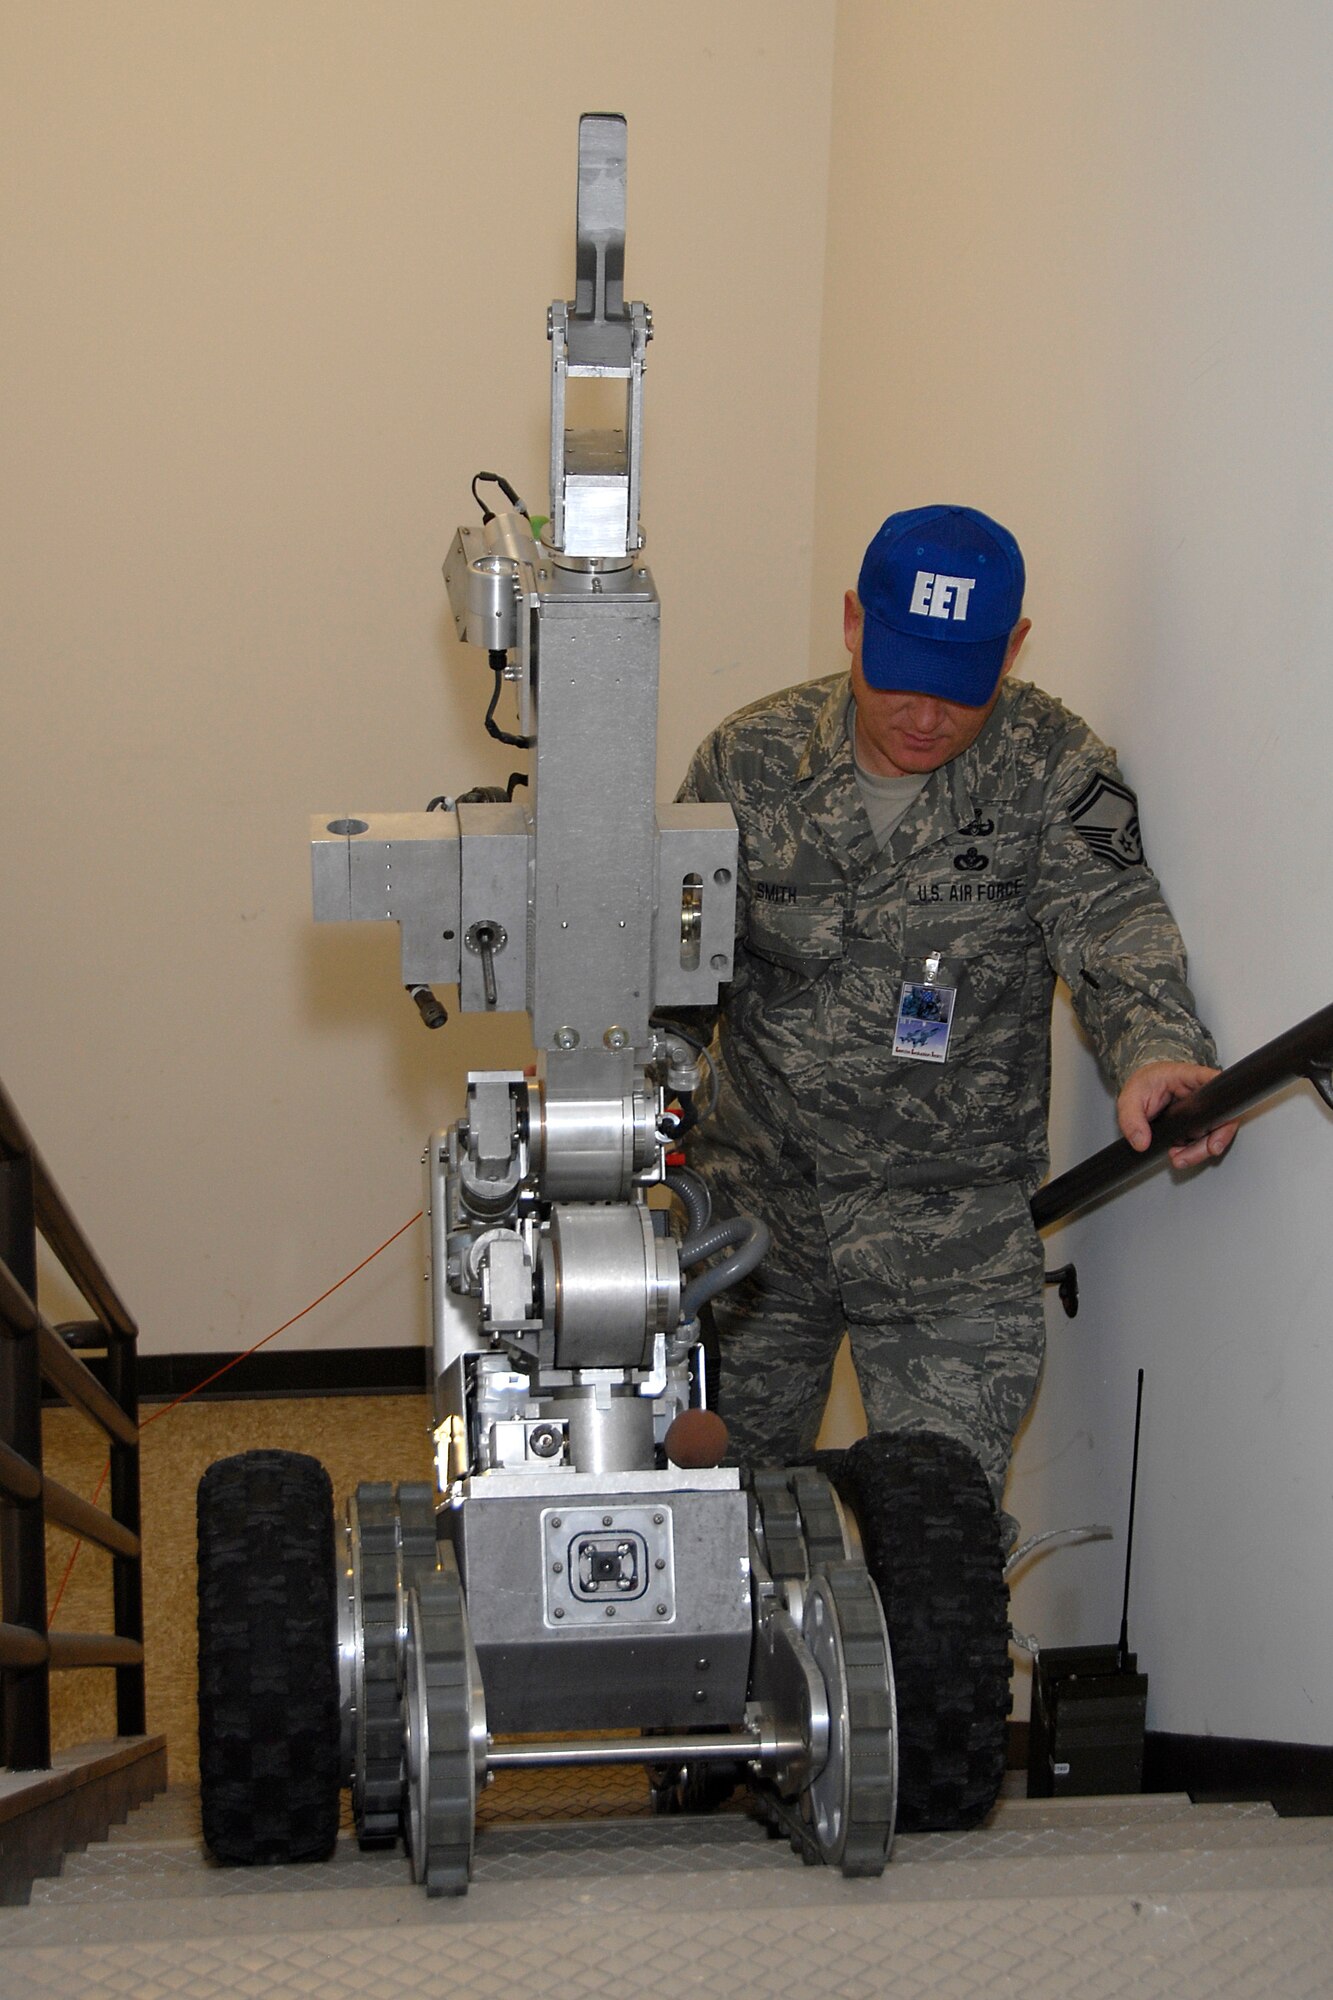 Senior Master Sgt. Edward Smith, 115th Explosive Ordnance Disposal Flight and Exercise Evaluation Team member, walks behind the F-6A Andros hazardous duty robot that was used to give critical intelligence to responding forces during a suspicious package exercise held at here March 18. The joint exercise included many different units on Truax Field as well as the U.S. Postal Service, Federal Bureau of Investigation and the 54th Civil Support Team. (U.S. Air Force Photo by Master Sgt. Dan Richardson)
